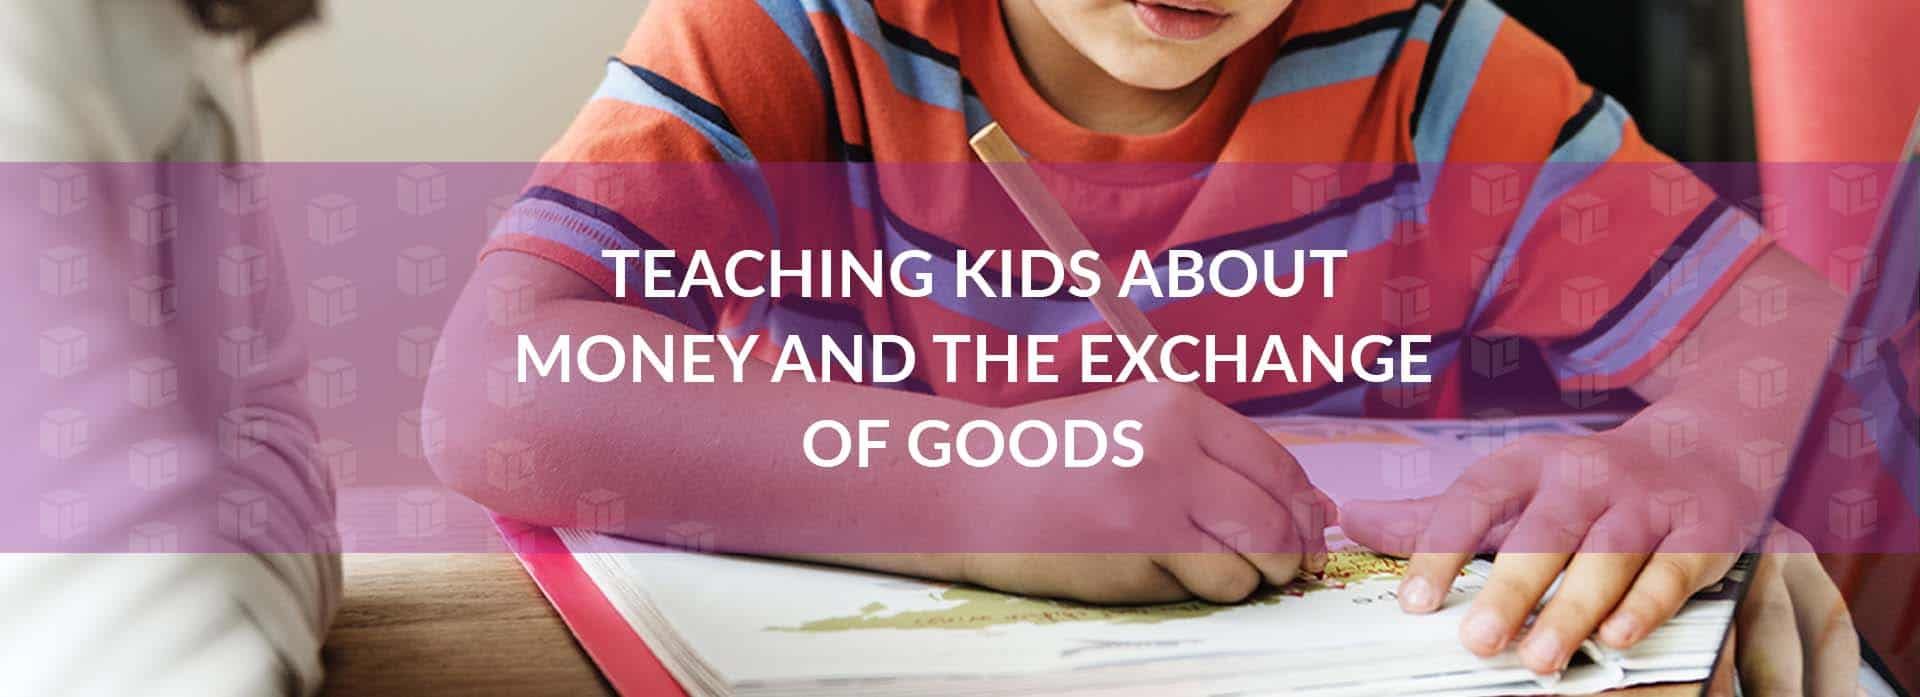 Teaching Kids About Money And The Exchange Of Goods Teaching Kids About Money And The Exchange Of Goods Teaching Kids About Money And The Exchange Of Goods Teaching Kids About Money And The Exchange Of Goods